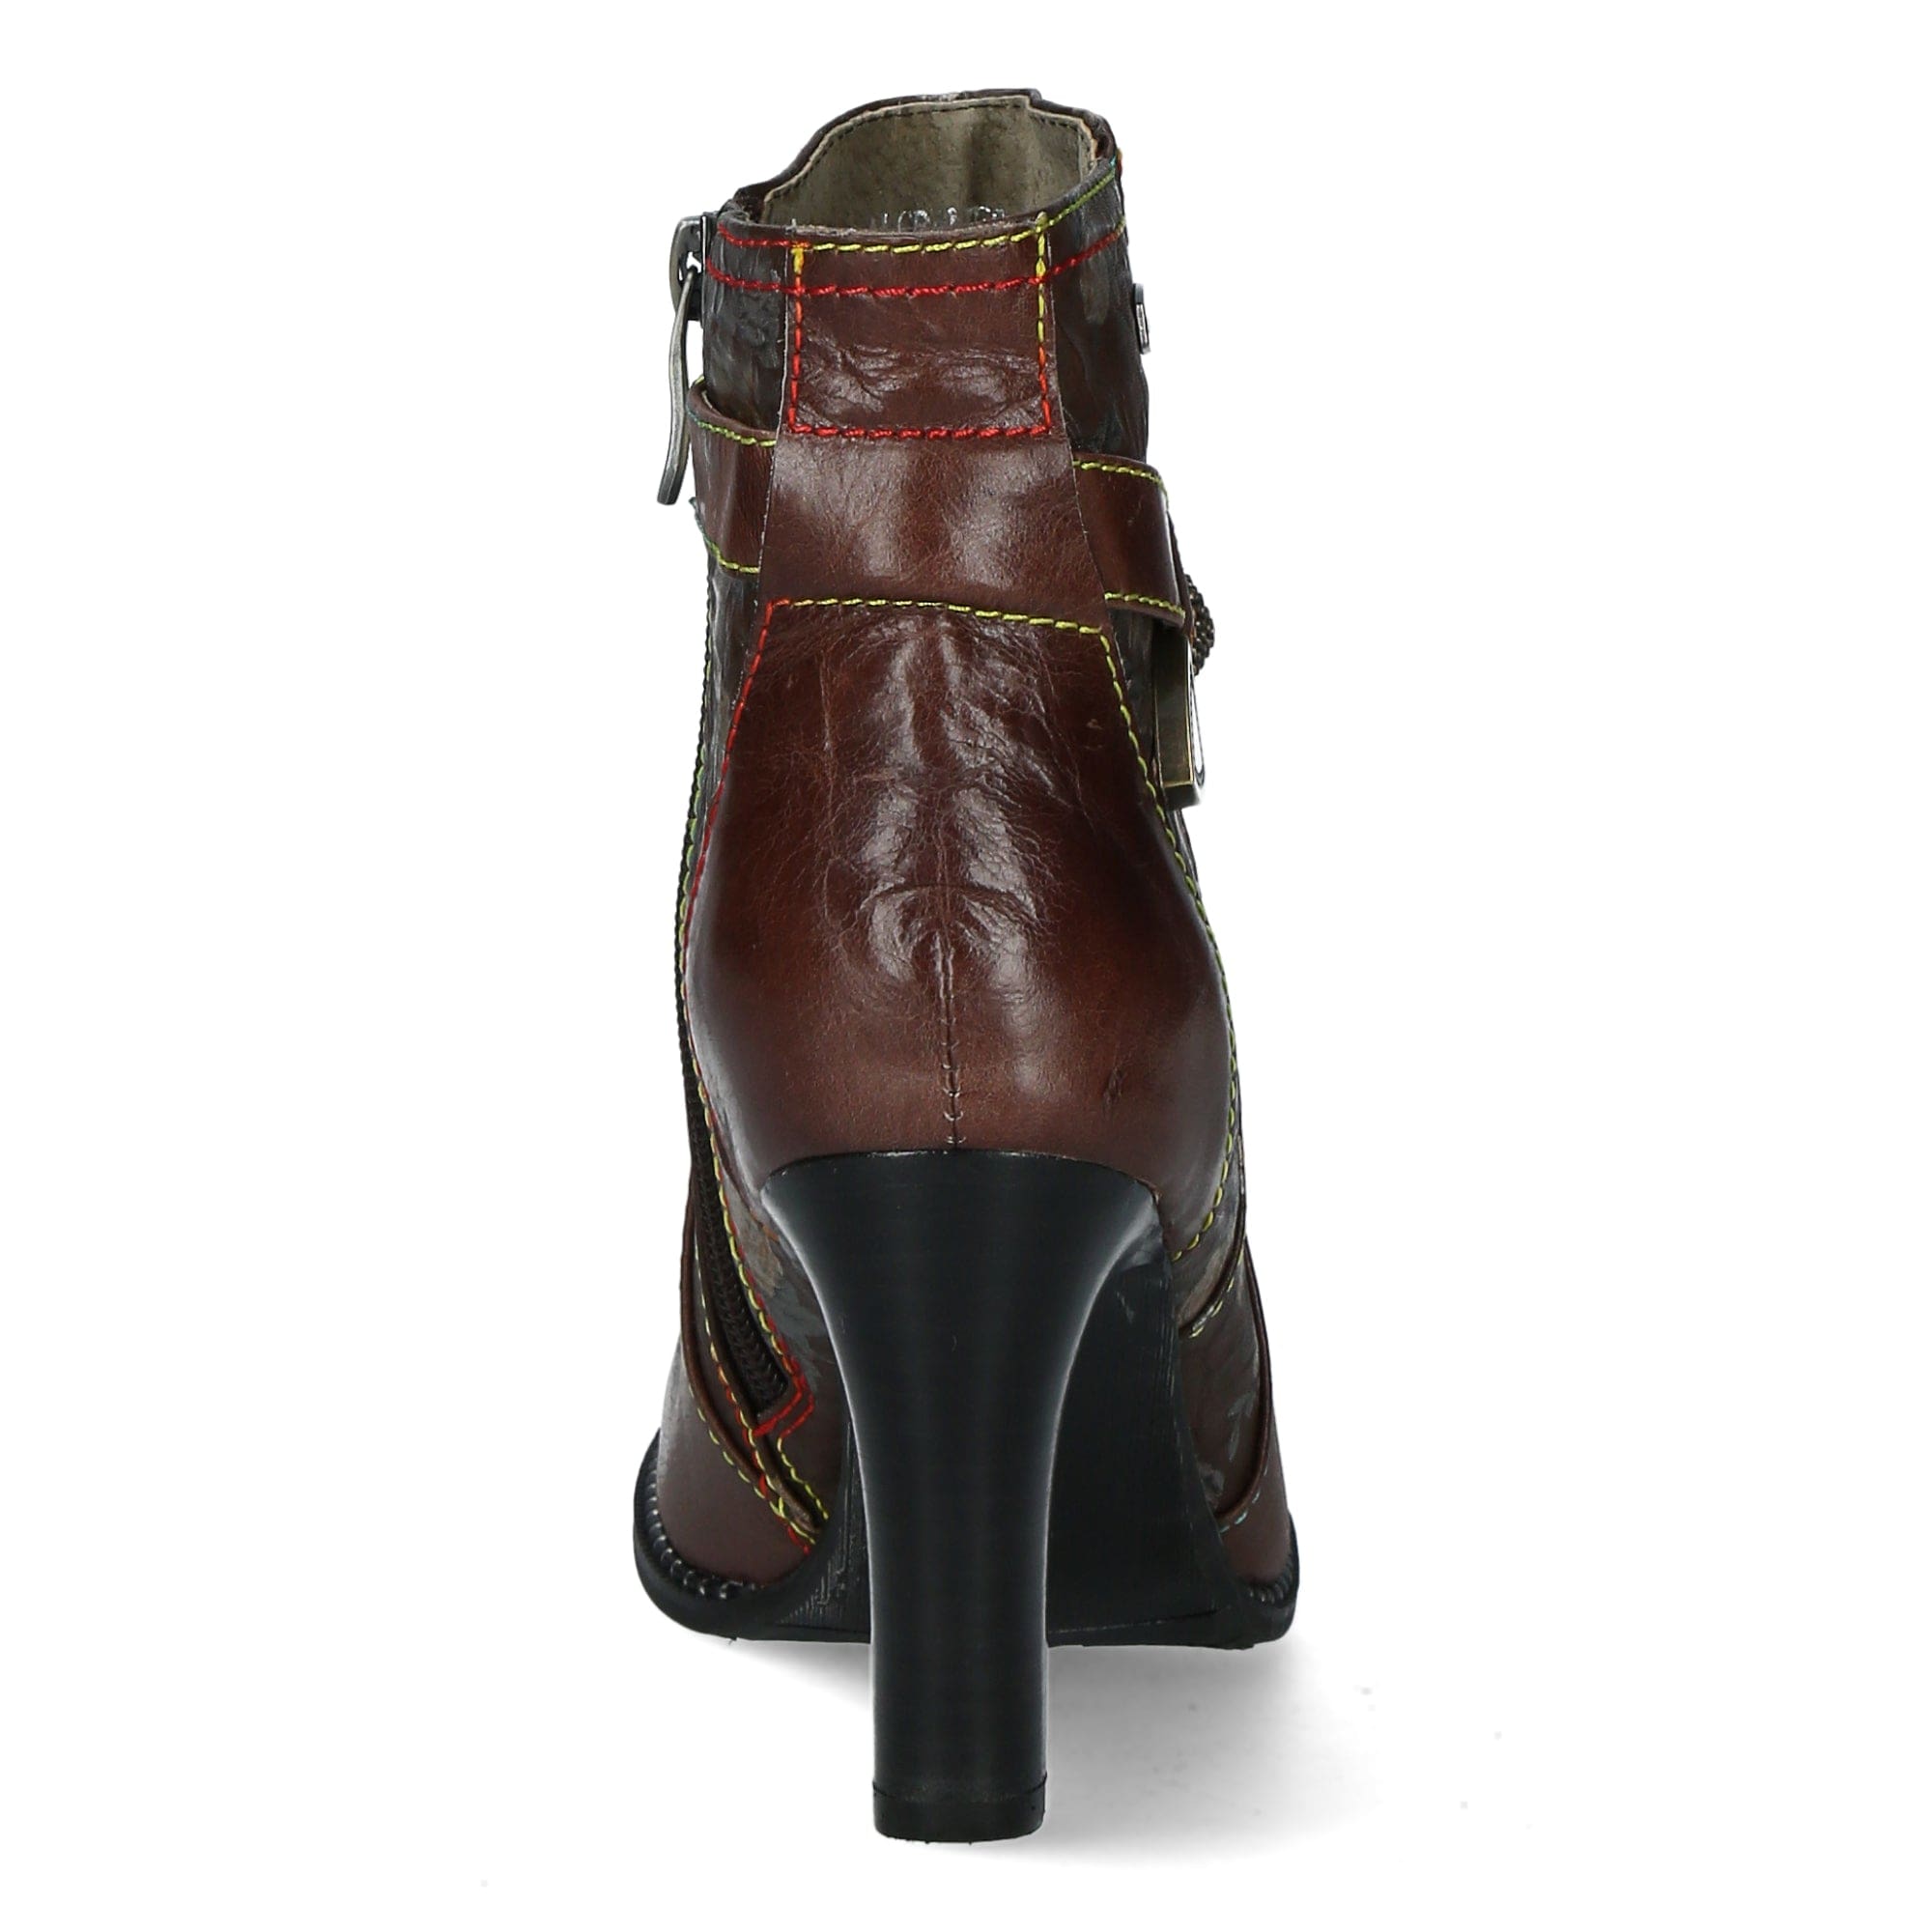 Schuh ALCBANEO 226F - Boots